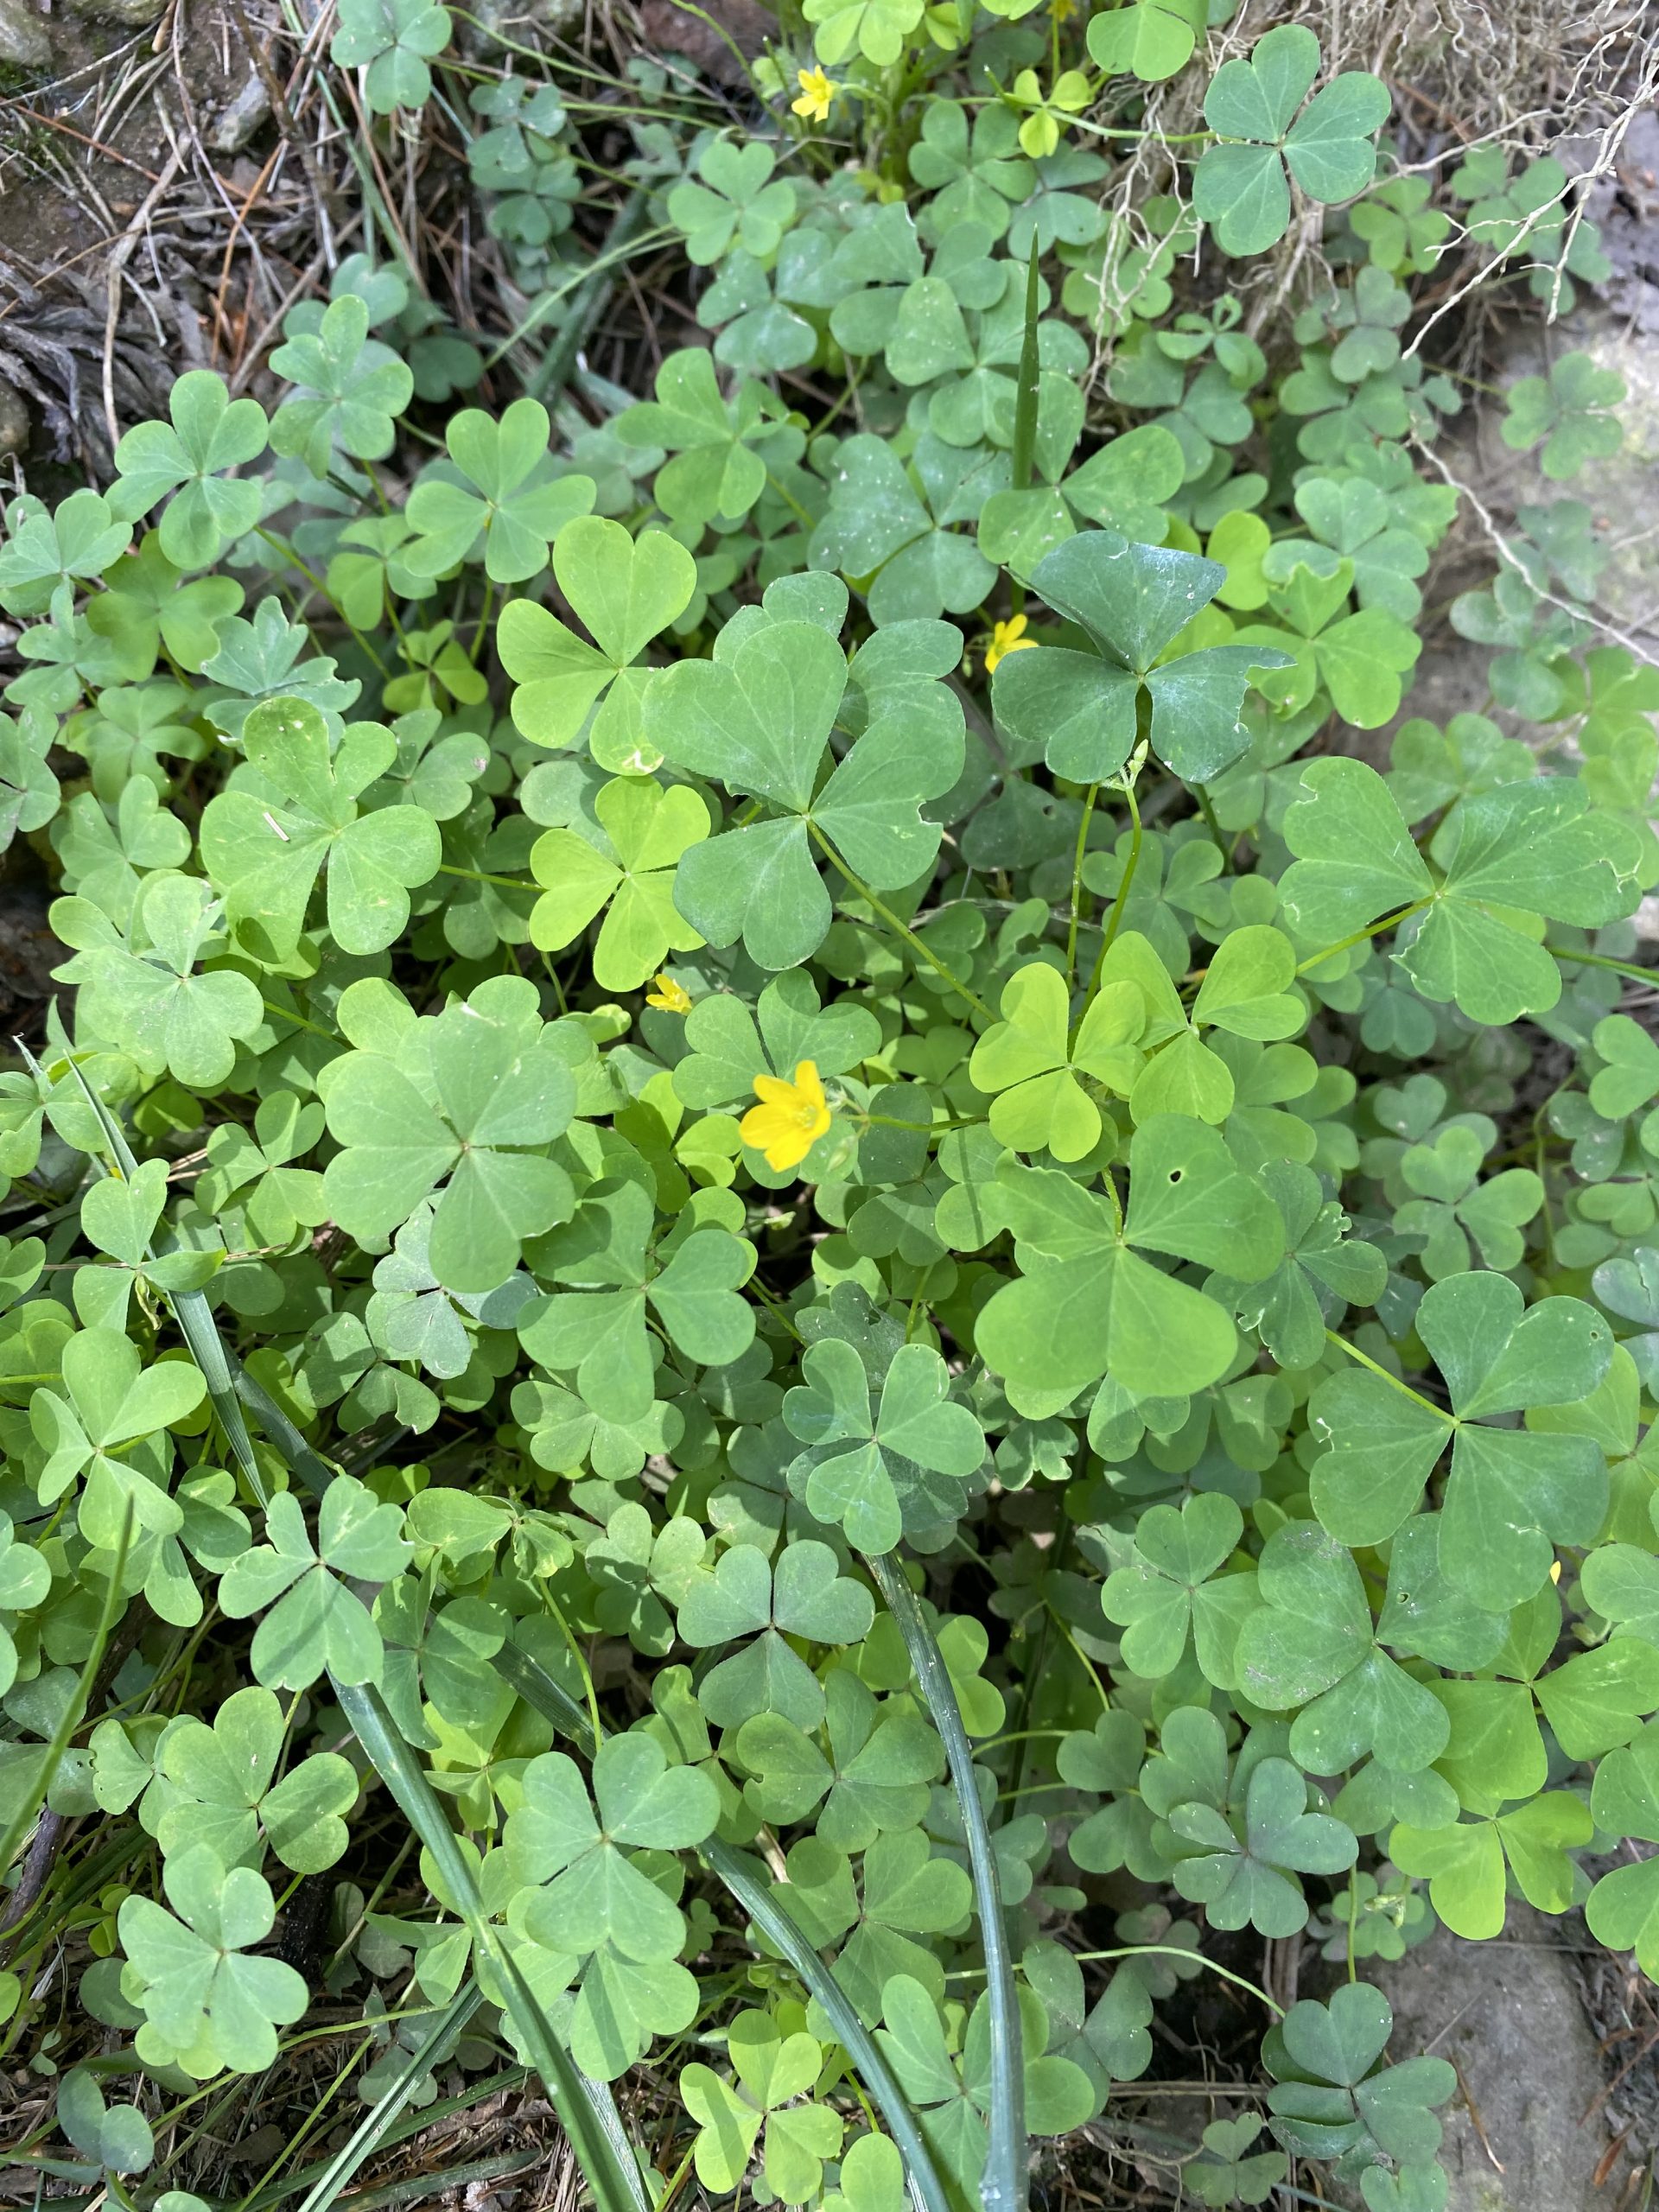 Oxalis_clover-like_lawn_weed